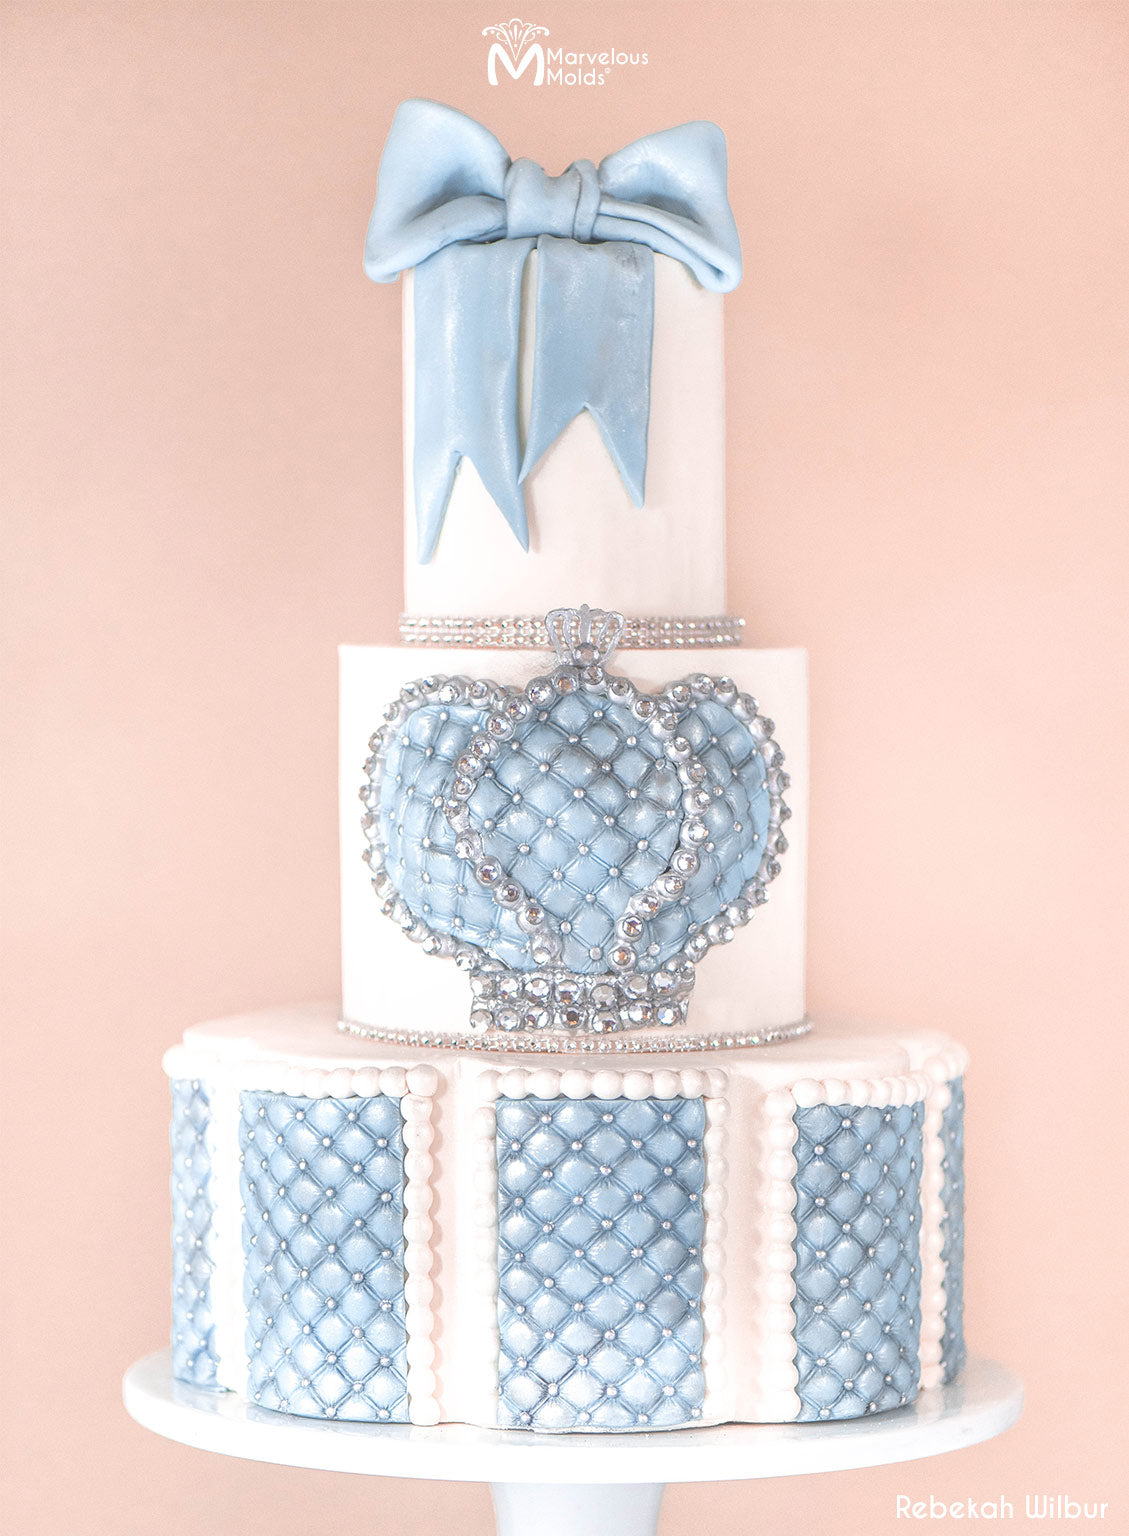 Royal Themed Birthday Cake Decorated Using the Tufted Swiss Dot Simpress by Marvelous Molds